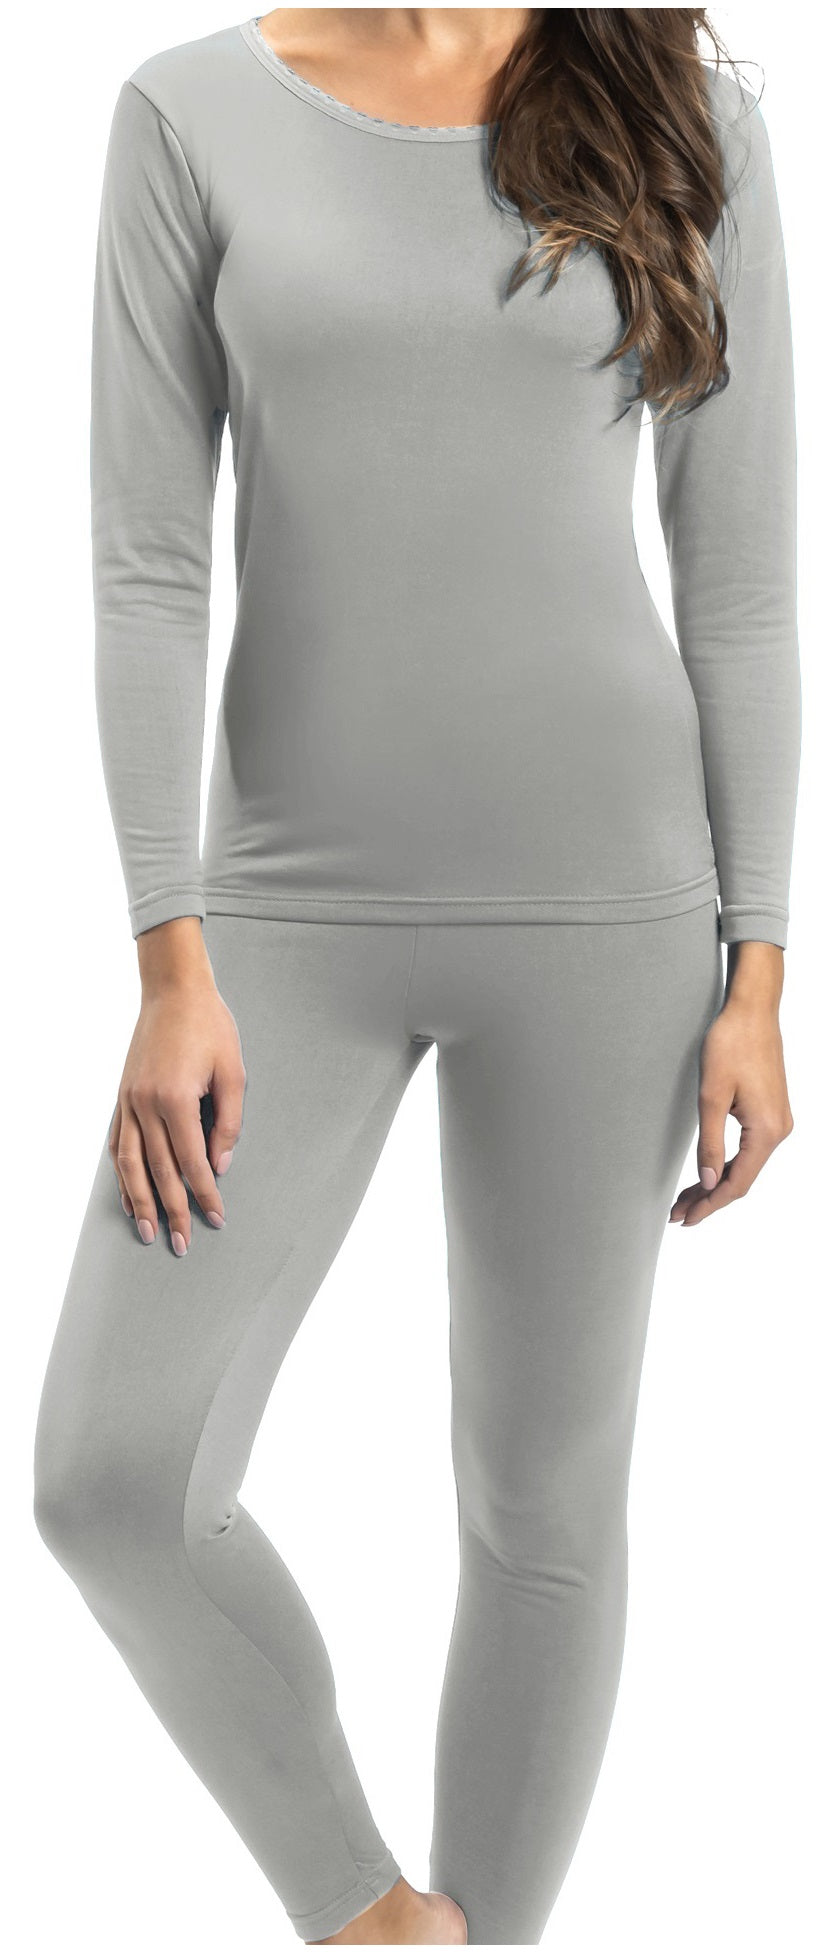 Ultra Dry Women's Thermal Underwear Set, Heather Gray, 3X-Large : Buy  Online at Best Price in KSA - Souq is now : Fashion